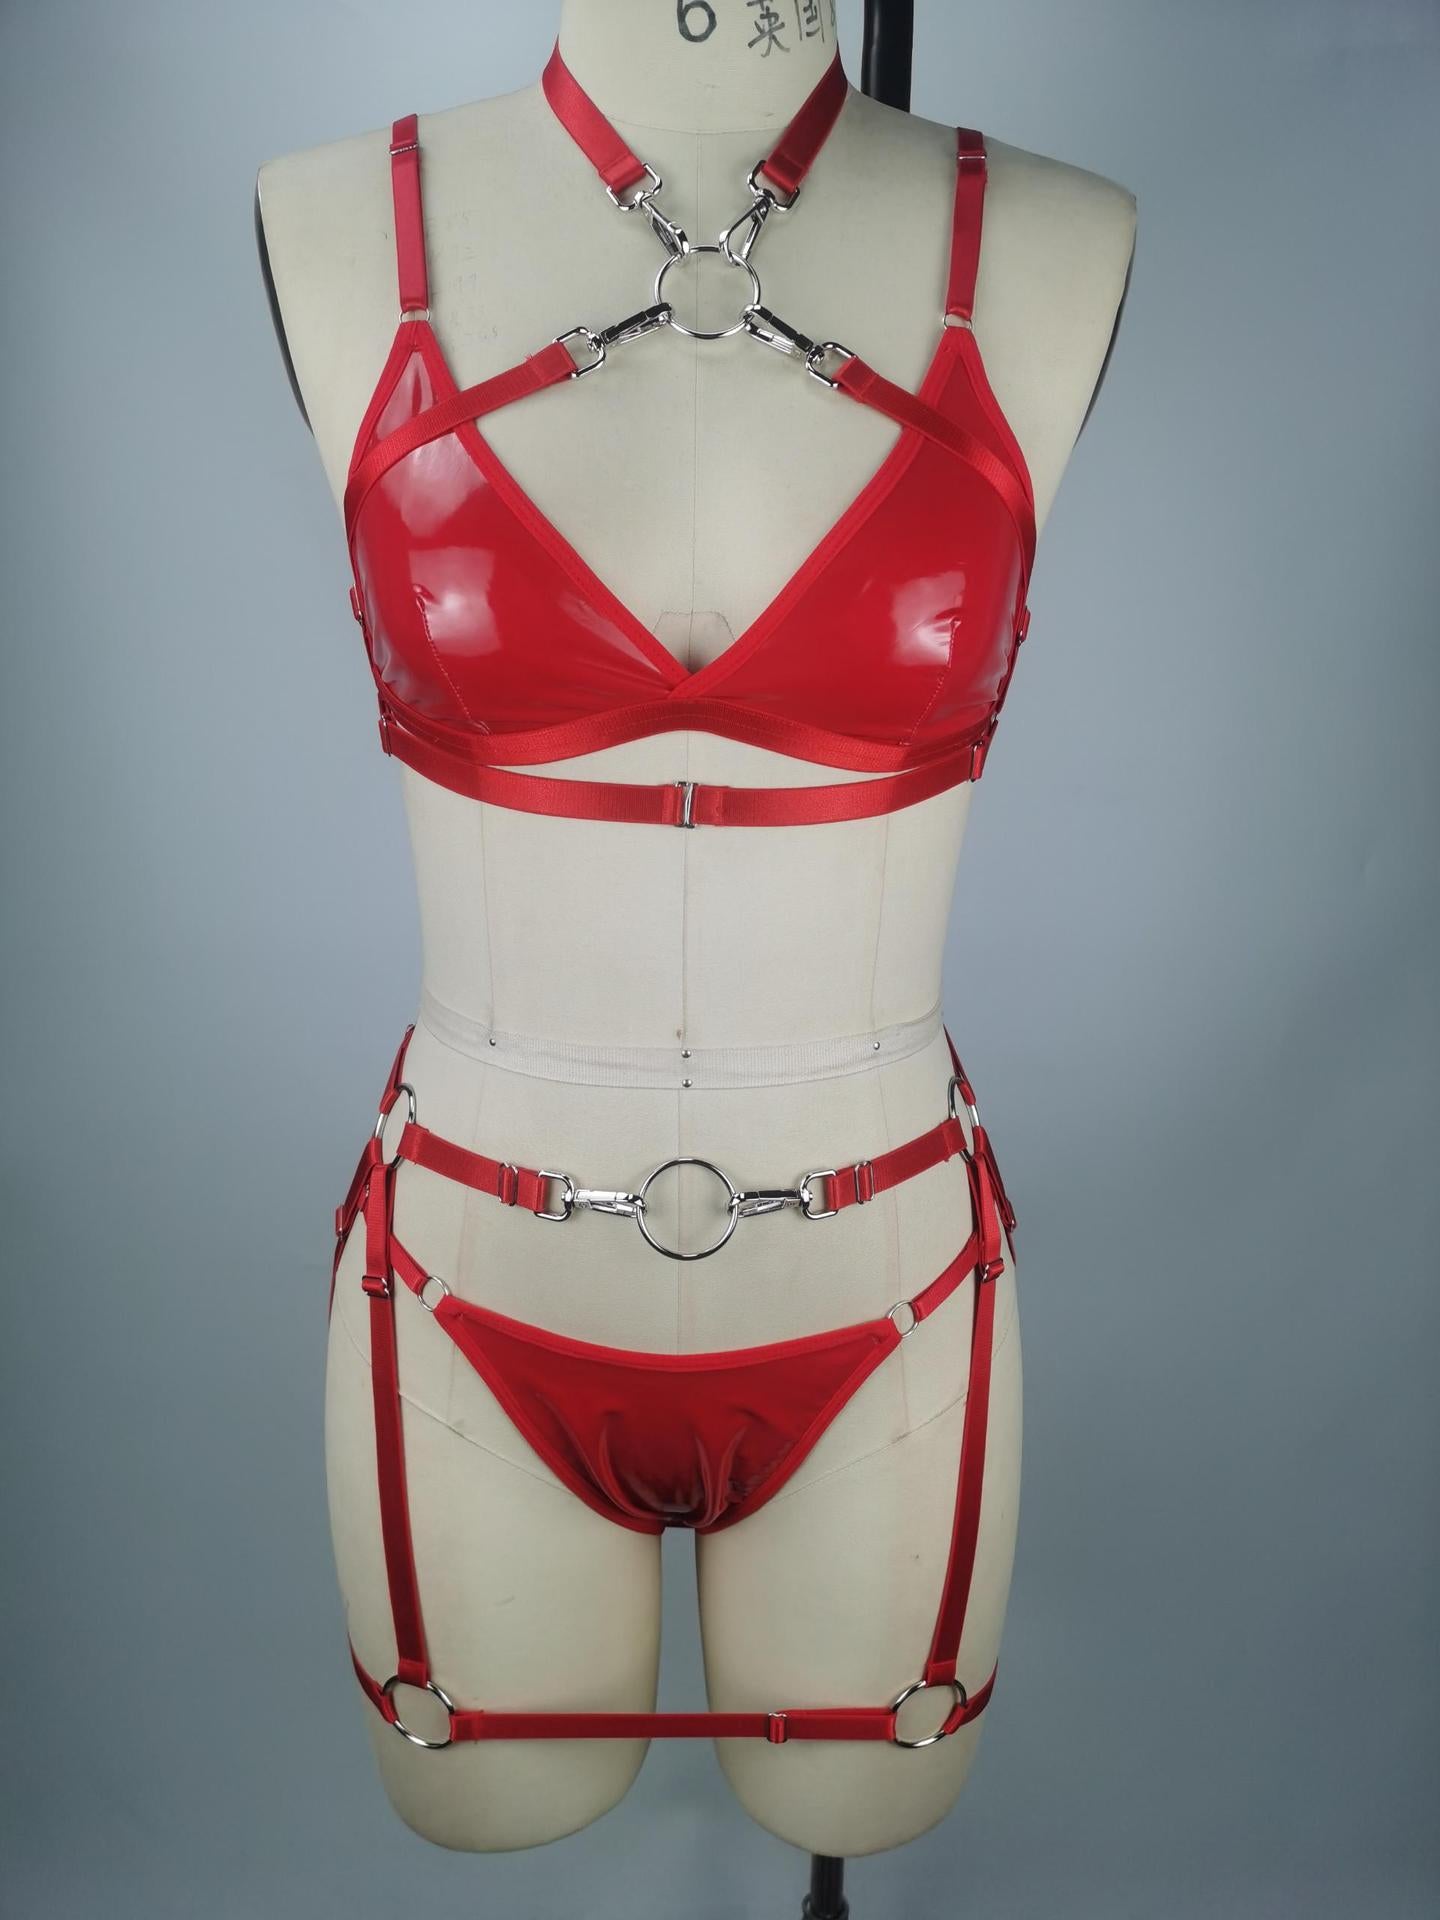 Submissive Womens Leather Lingerie Set Sexiest Bra & Panty Red